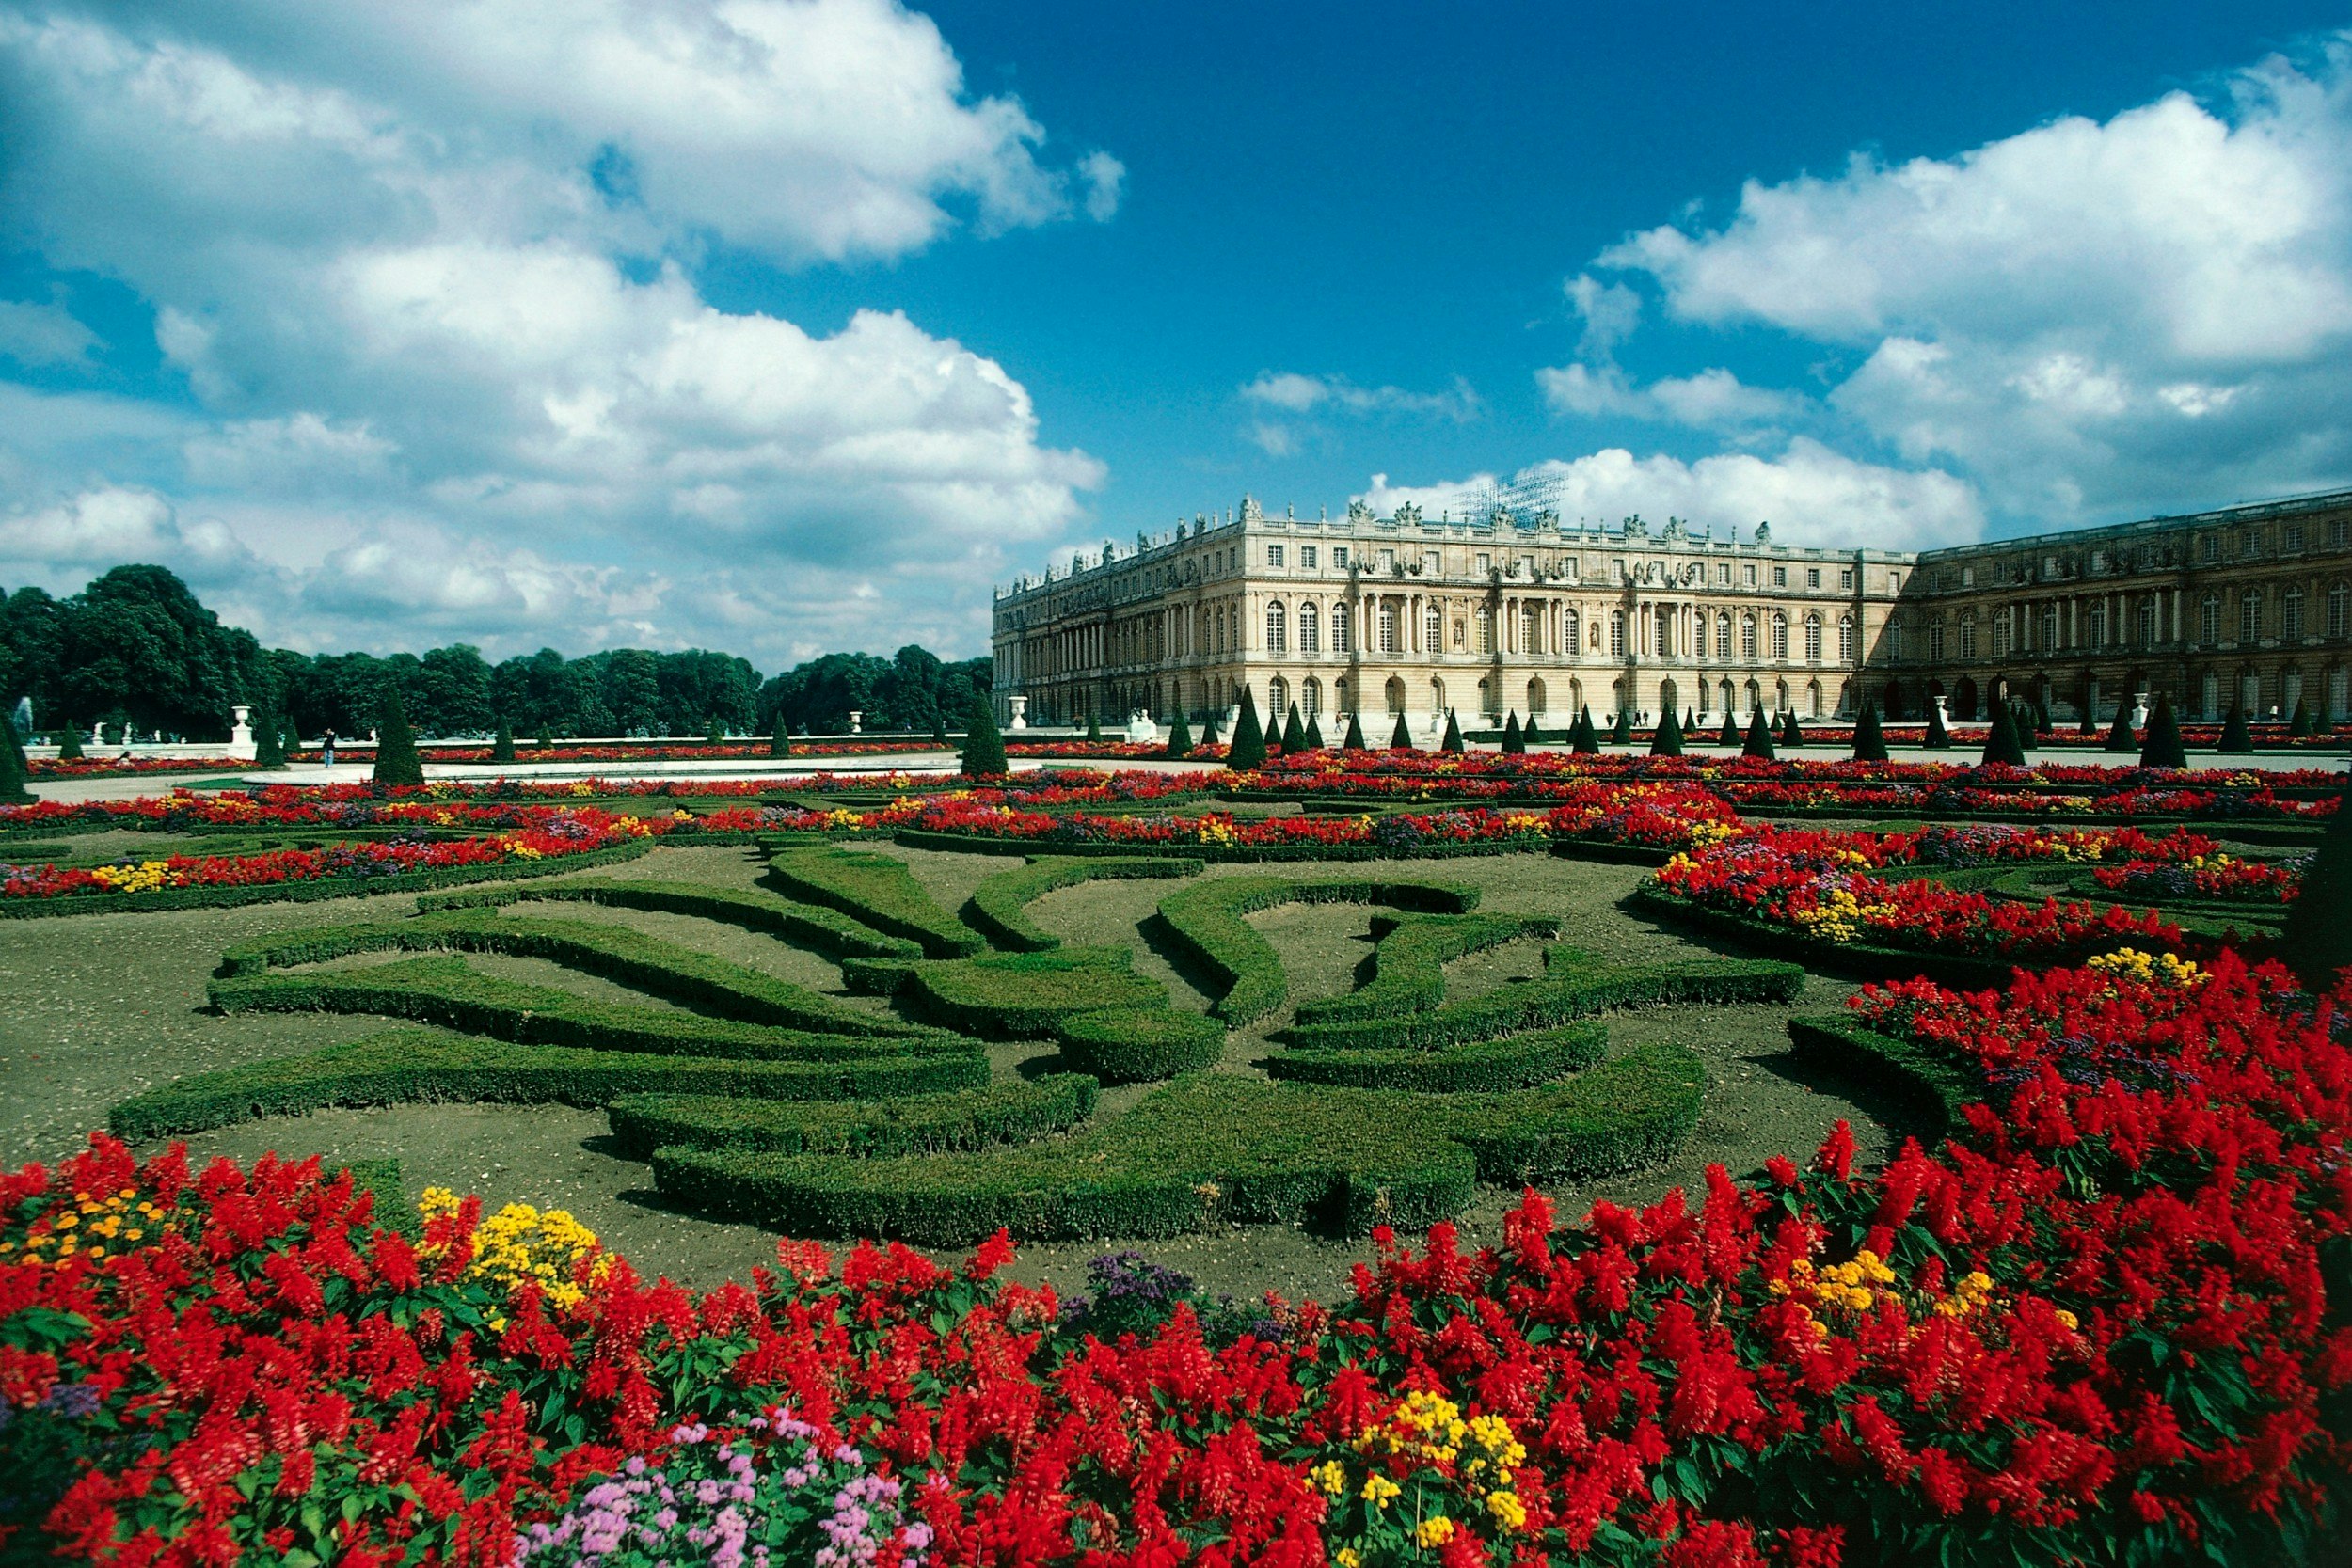 View of the Palace of Versailles in France, with its gardens in full bloom